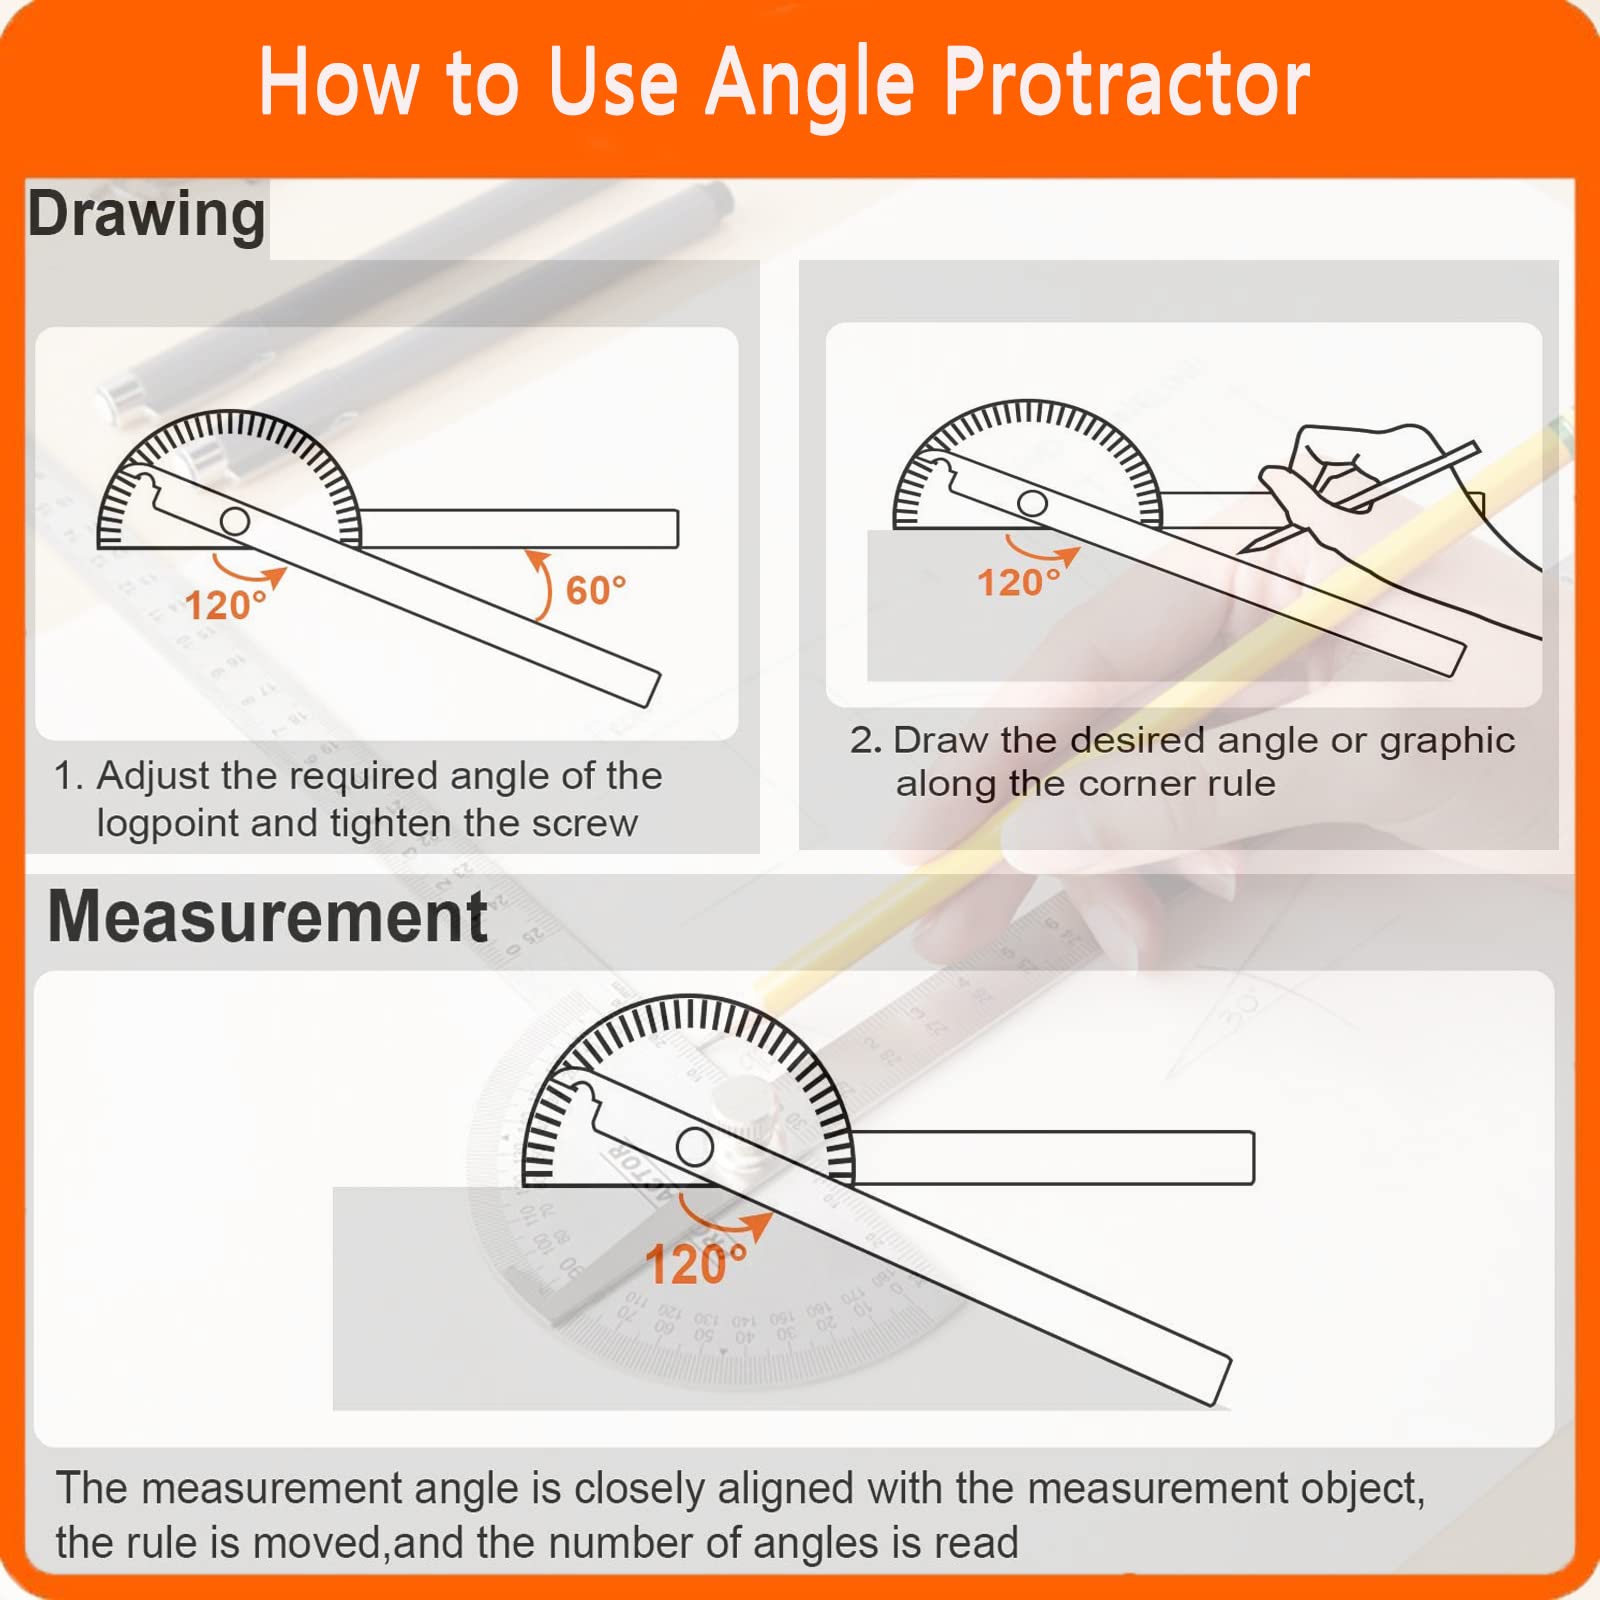 Angle Finder,Both Arms Stainless Steel Protractor with 0-180 Degrees Angle 10 inch,250mm,30cm Scale Woodworking Ruler Angle Finder Ruler with Inch Units